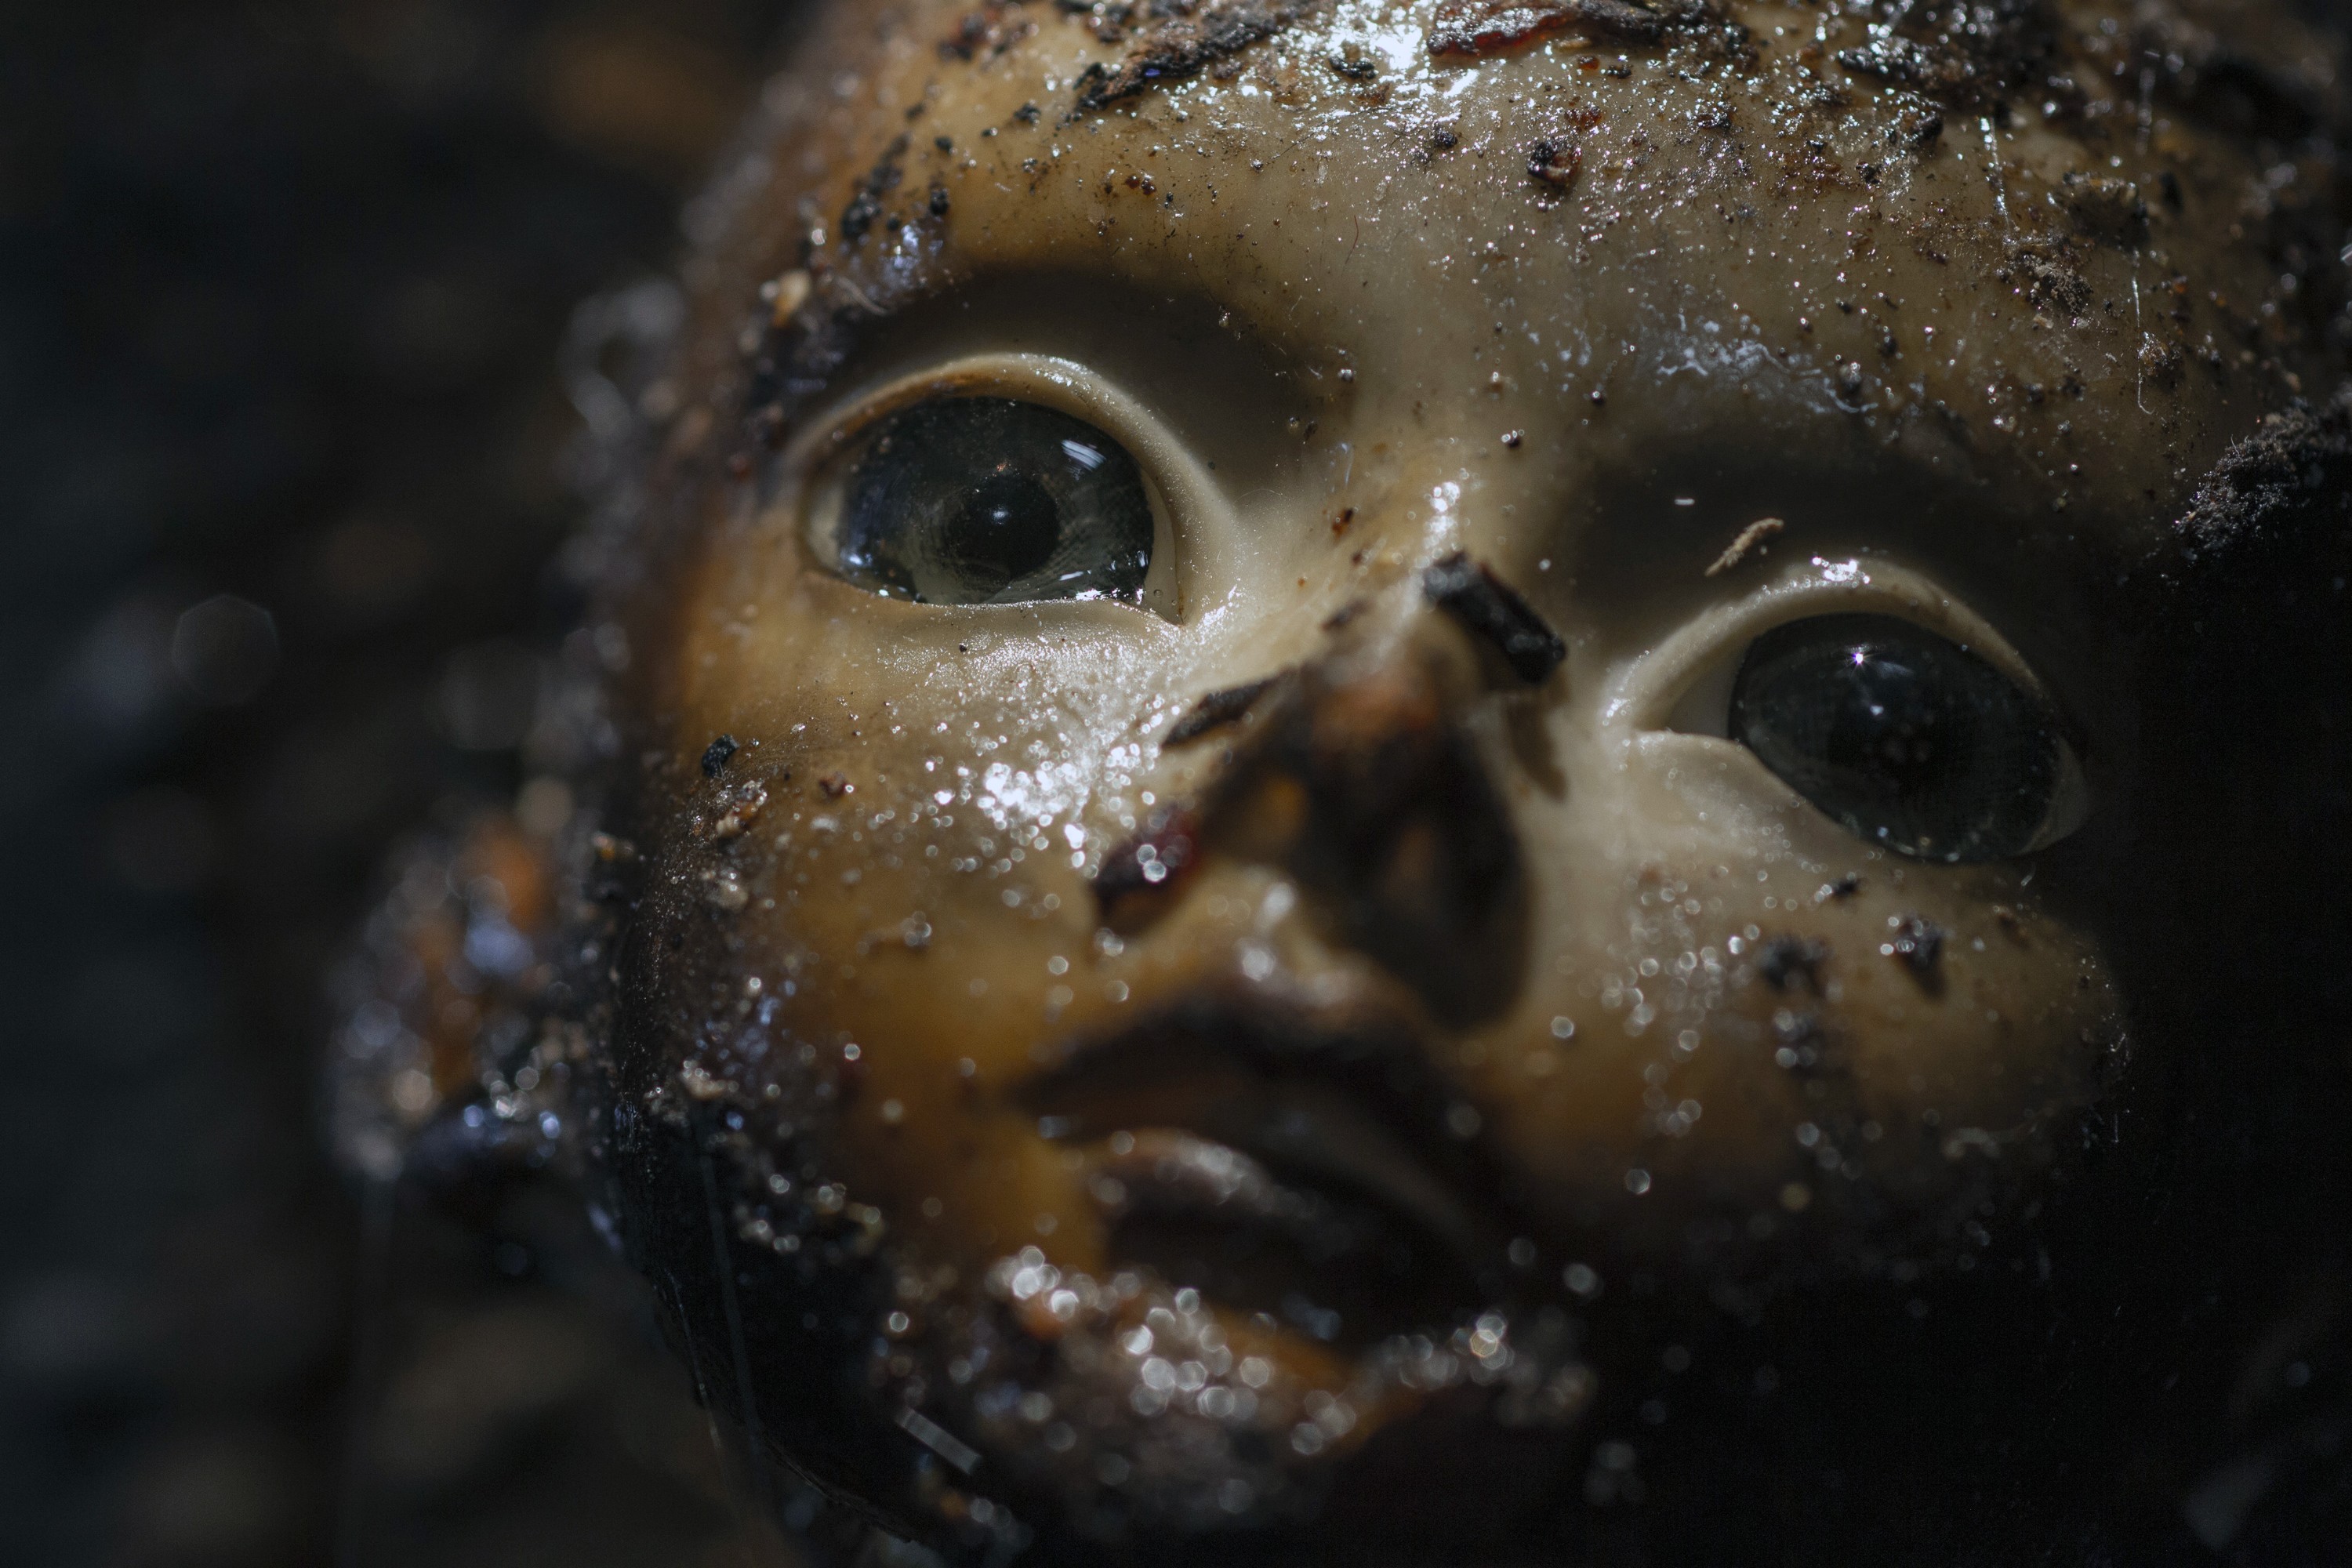 A scary doll with dirt on its face.